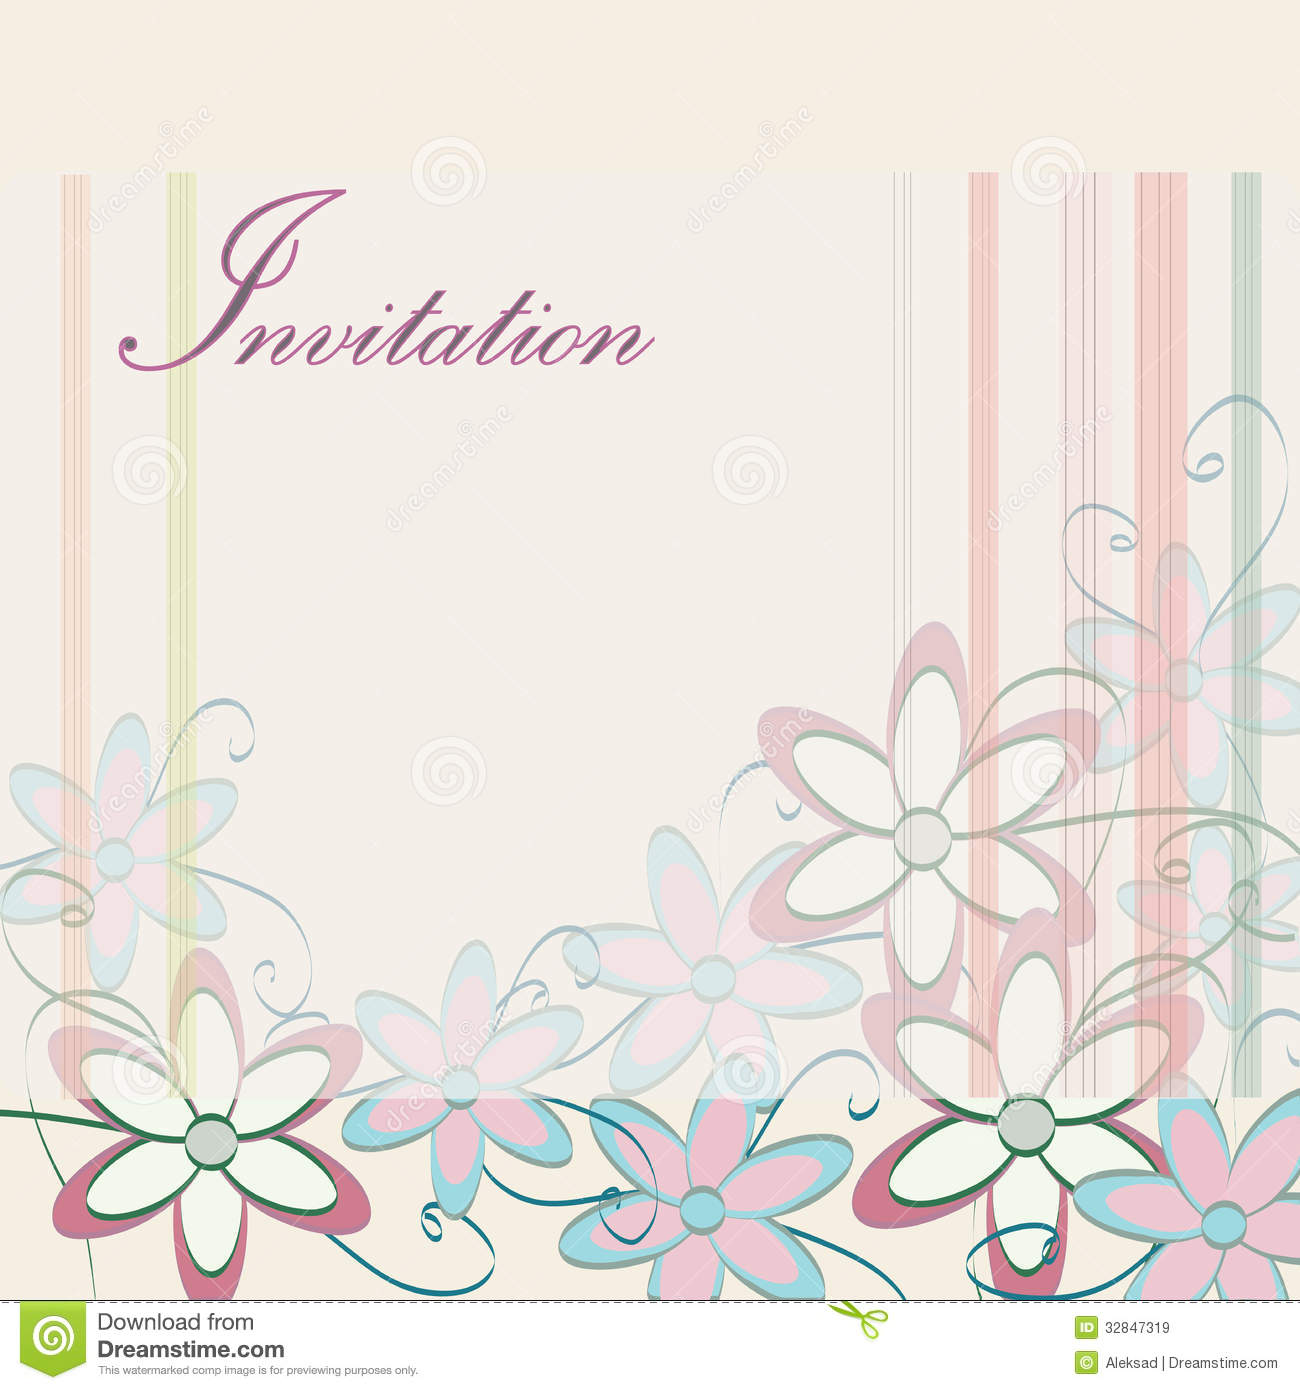 13 Download Free Wedding Invitation Cards Designs Images